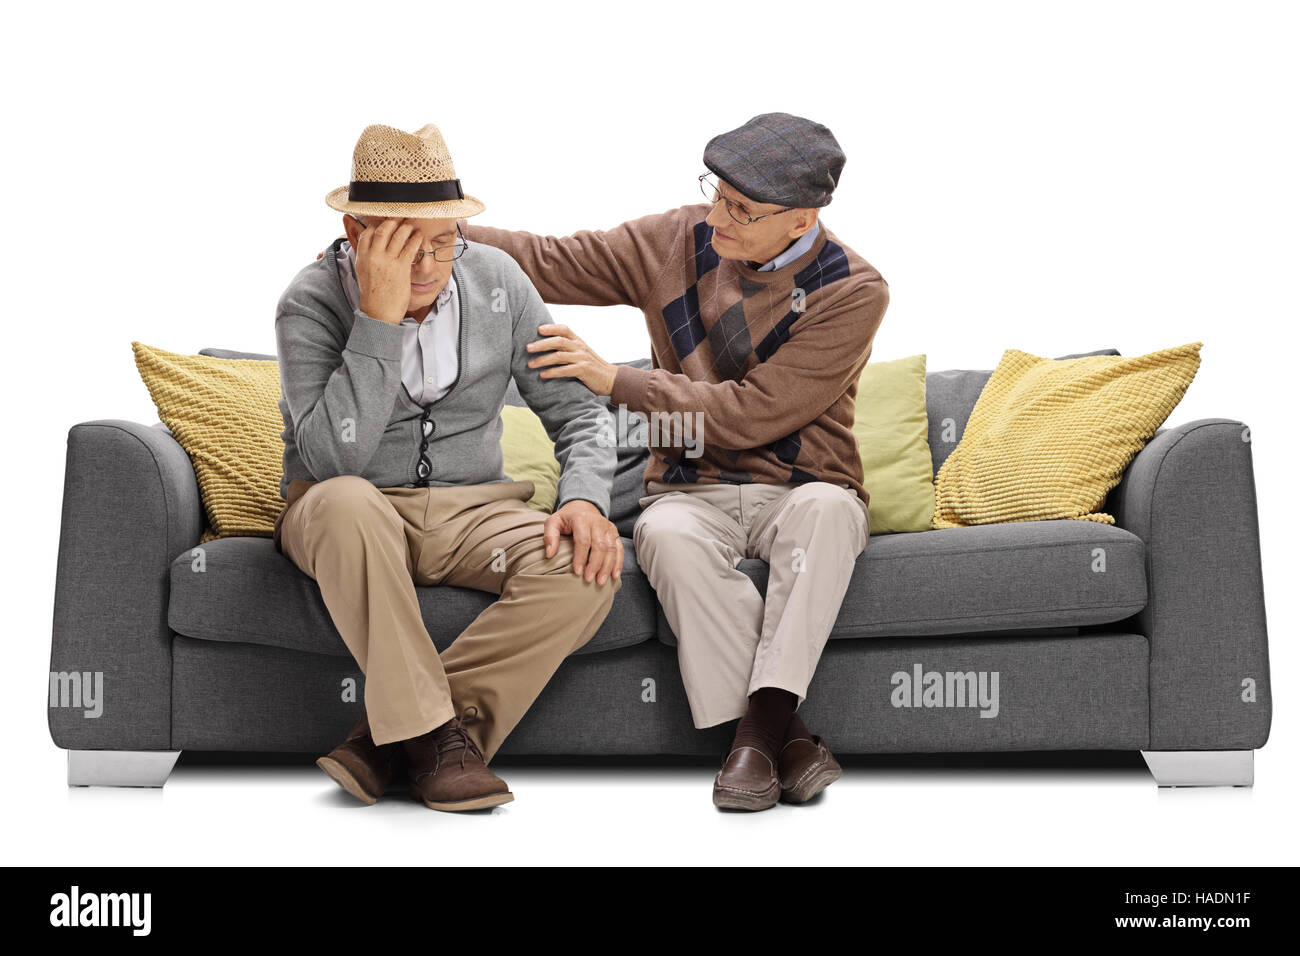 Elderly man sitting on a sofa and comforting another man isolated on white background Stock Photo